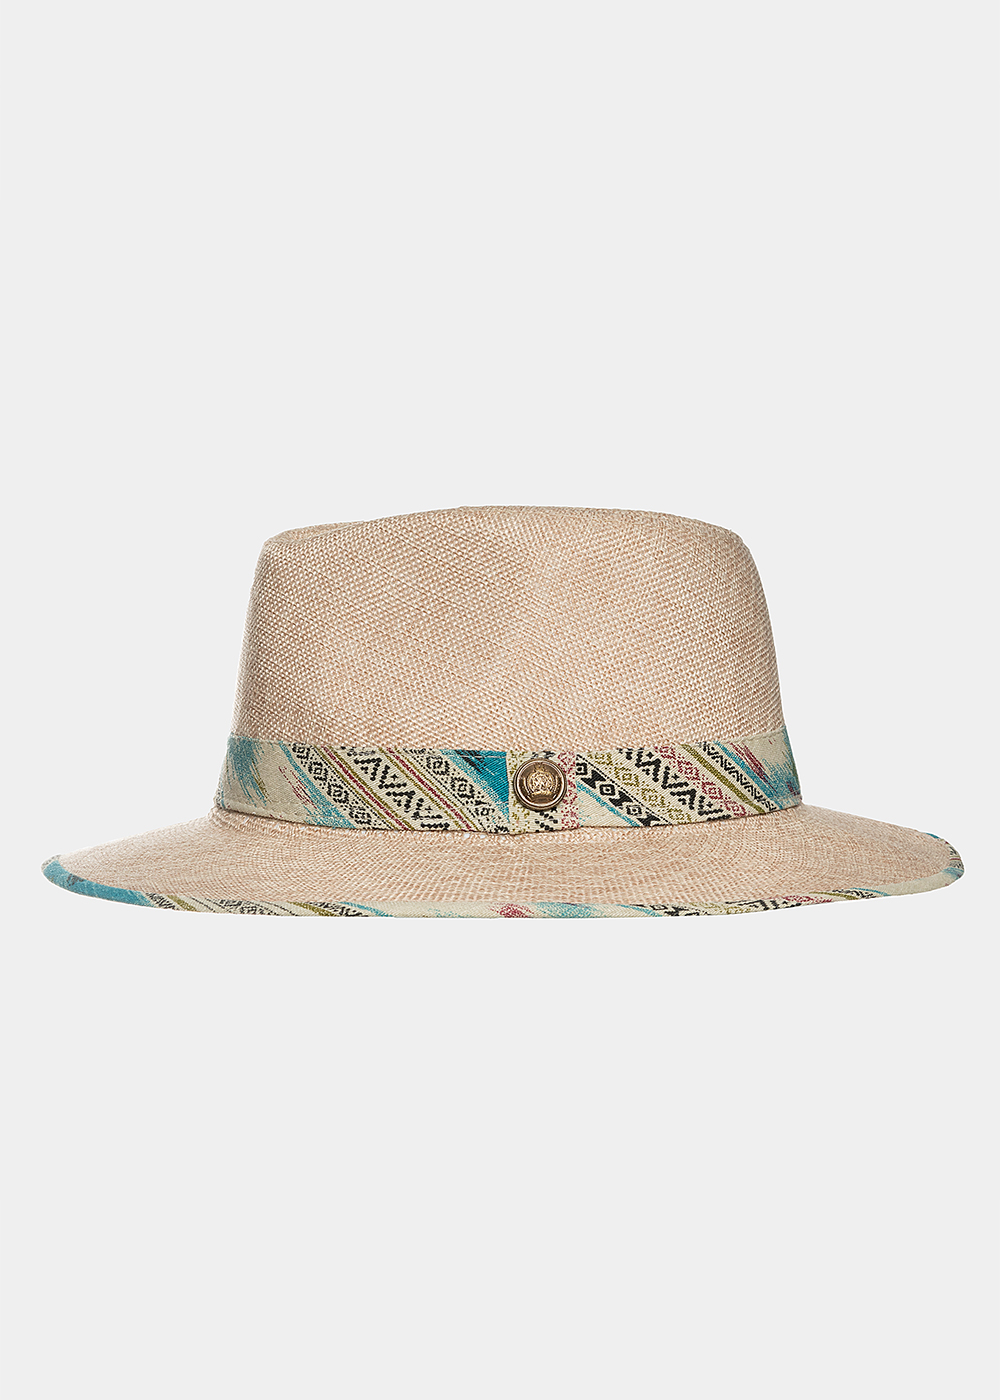 Beige panama with boho strap in turquoise 